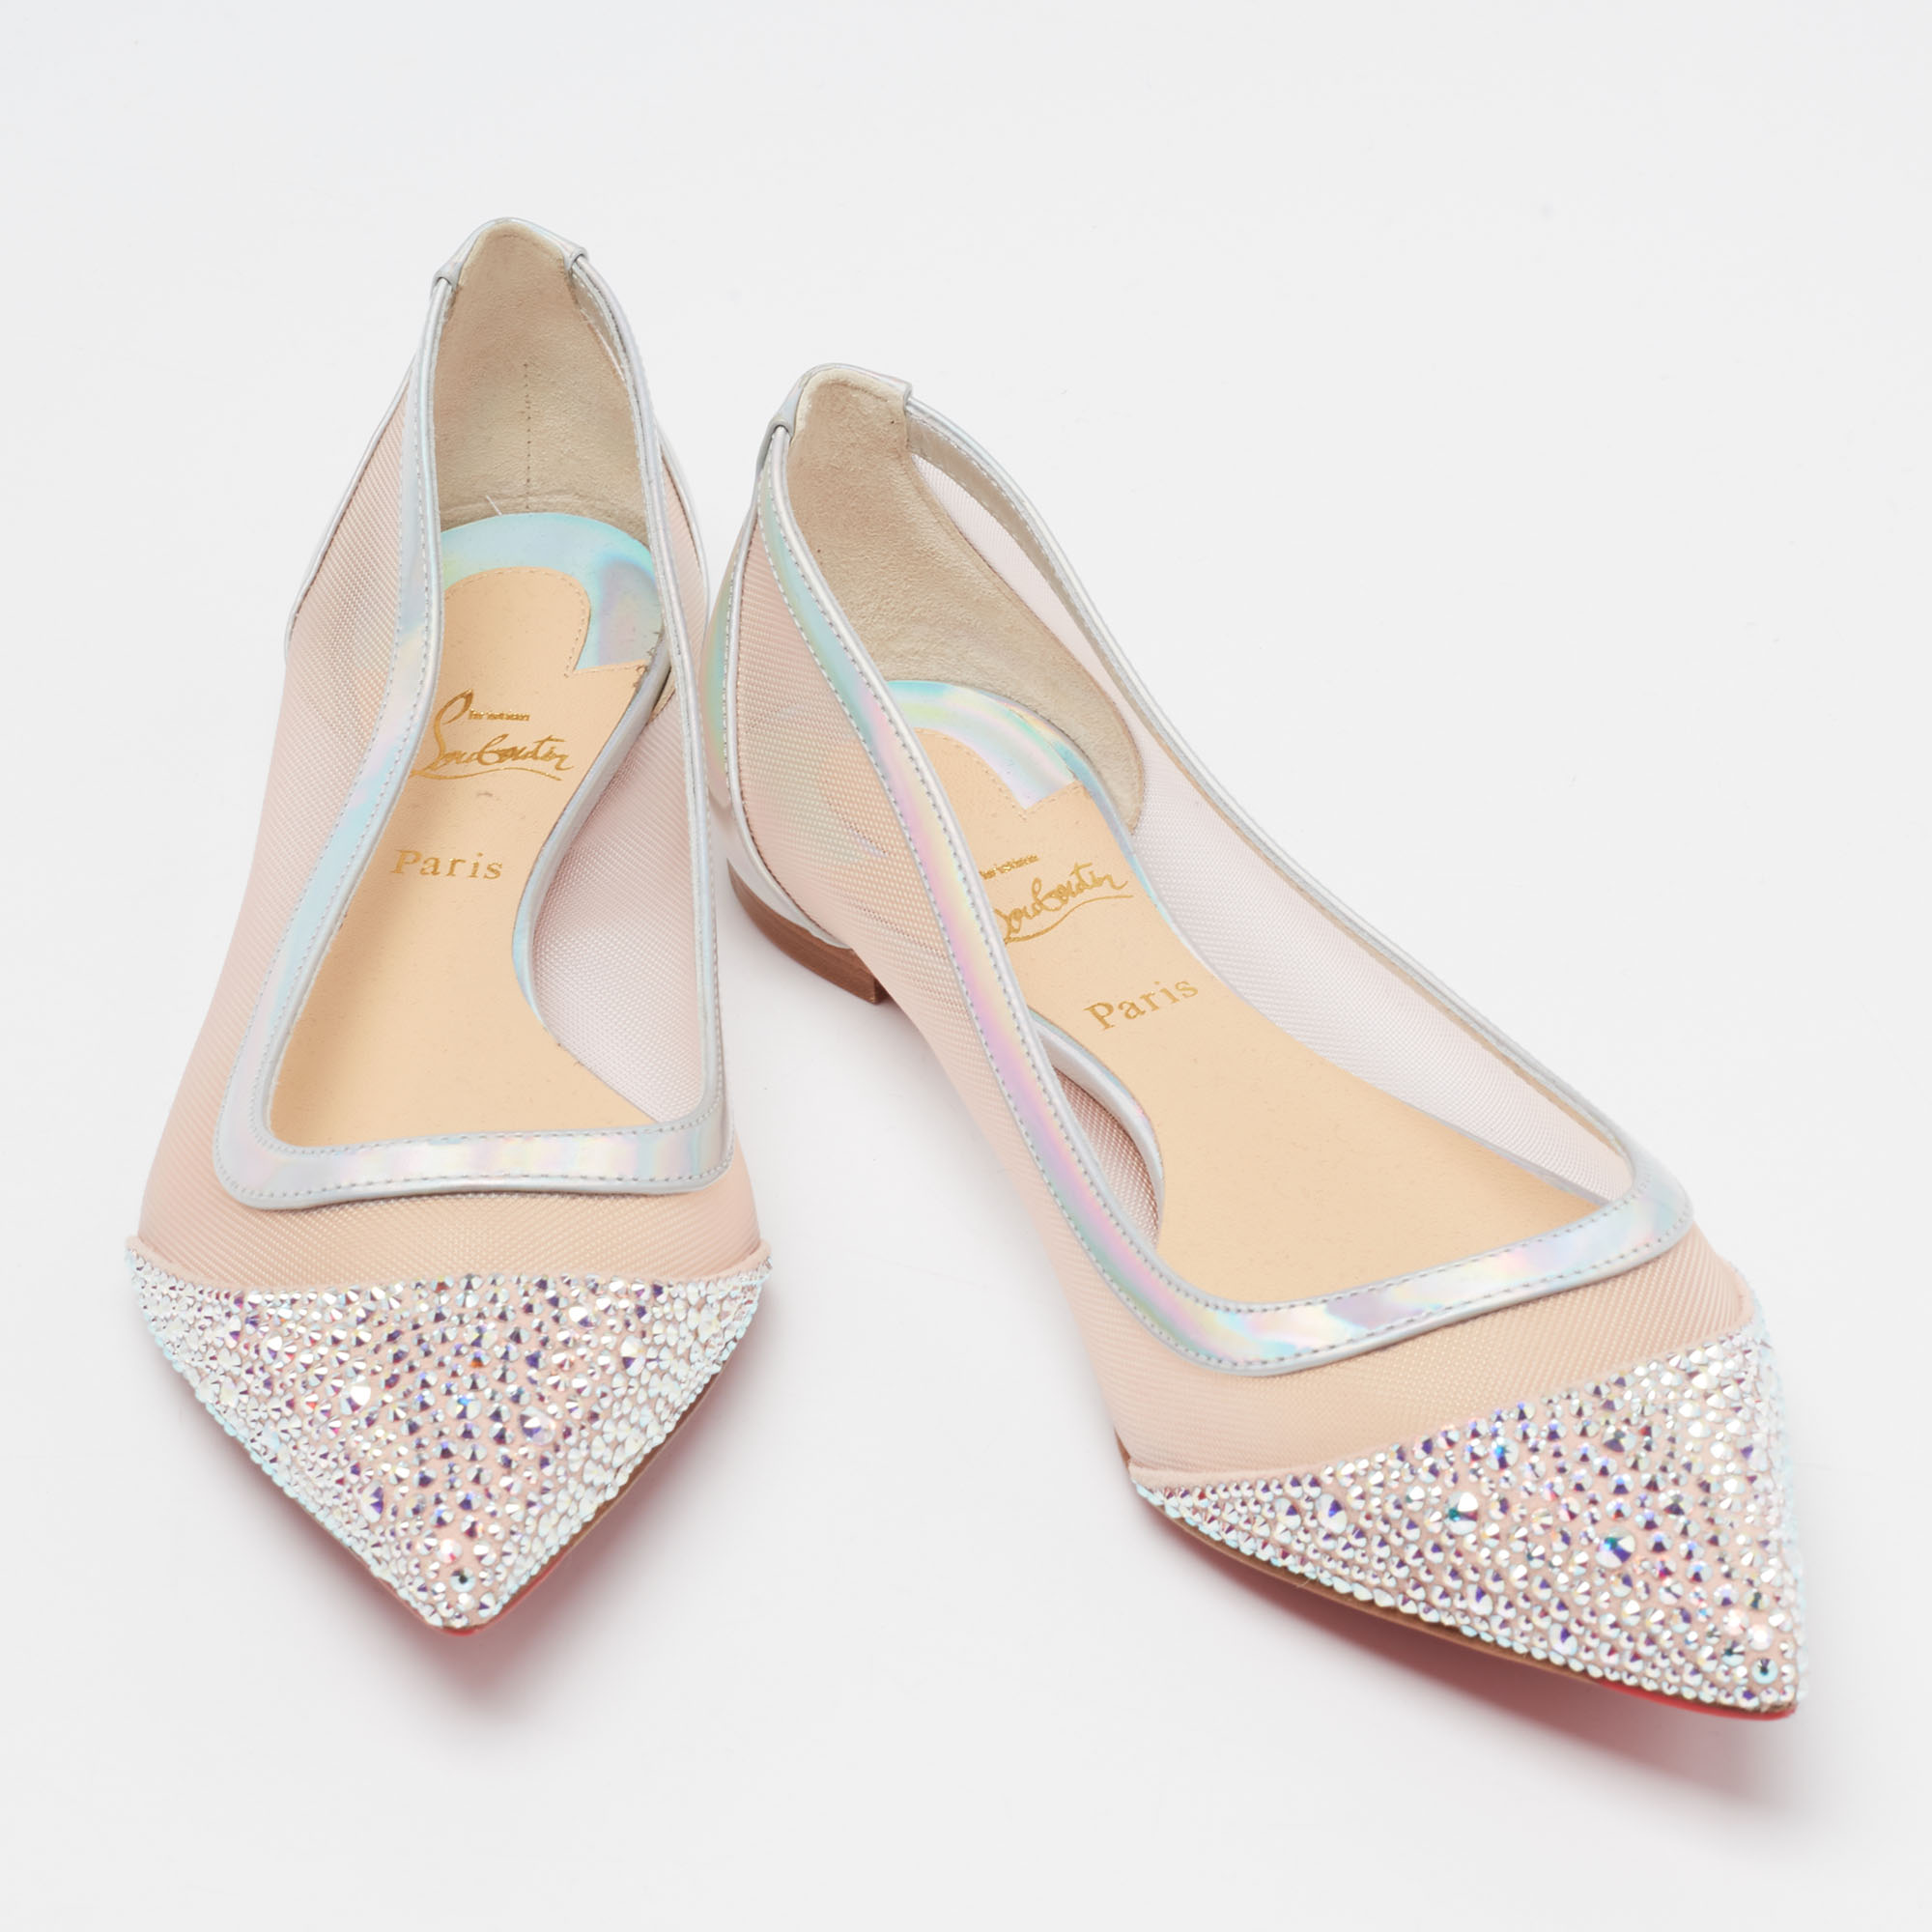 Christian Louboutin Light Pink Mesh, Iridescent Leather And Suede Galativi Strass Ballet Flats Size 35.5